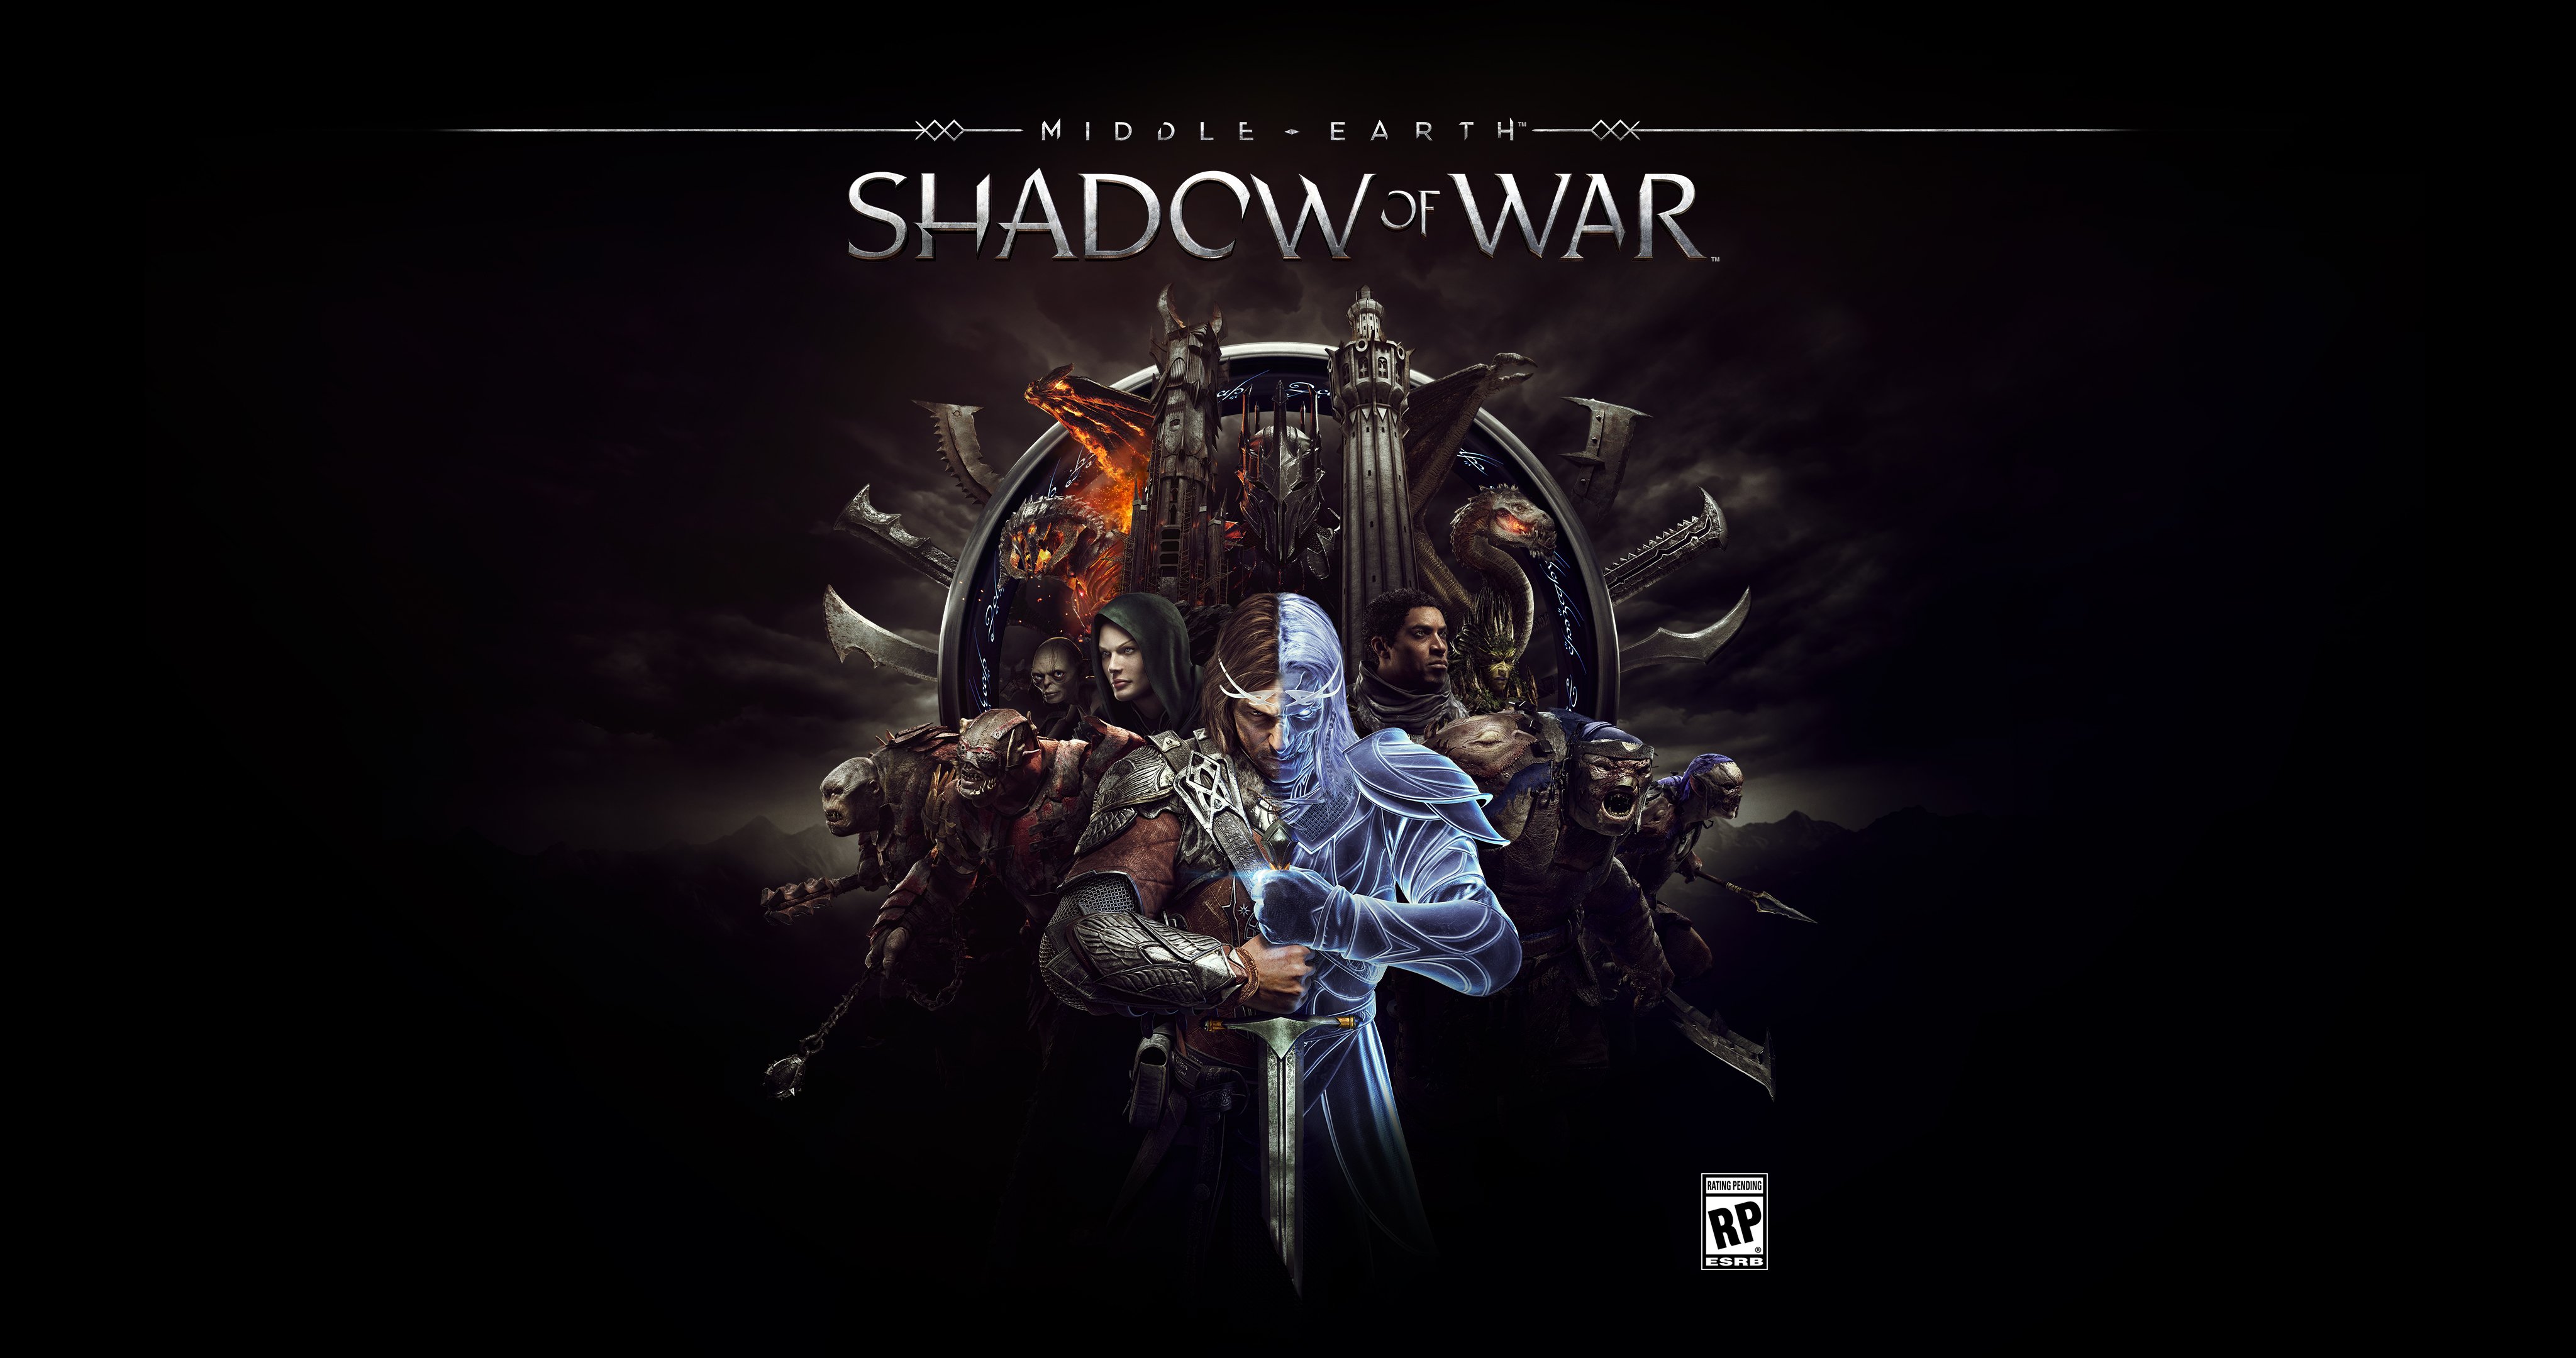 Middle earth, Middle Earth Shadow of War, Talion, Celebrimbor, Middle Earth: Shadow of War Wallpaper